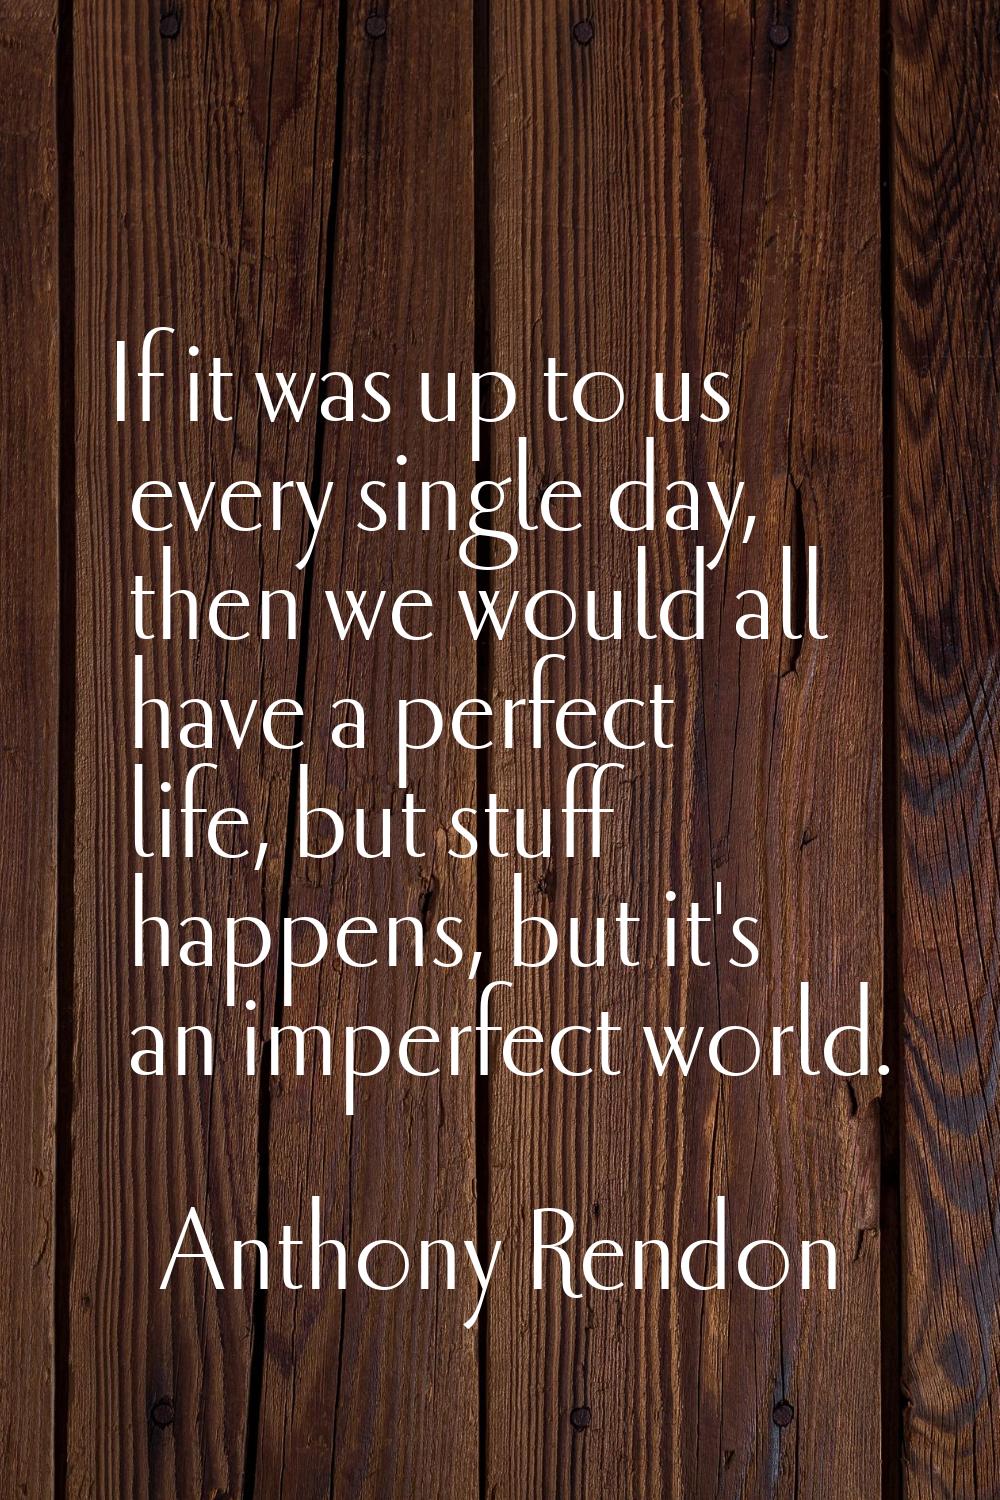 If it was up to us every single day, then we would all have a perfect life, but stuff happens, but 